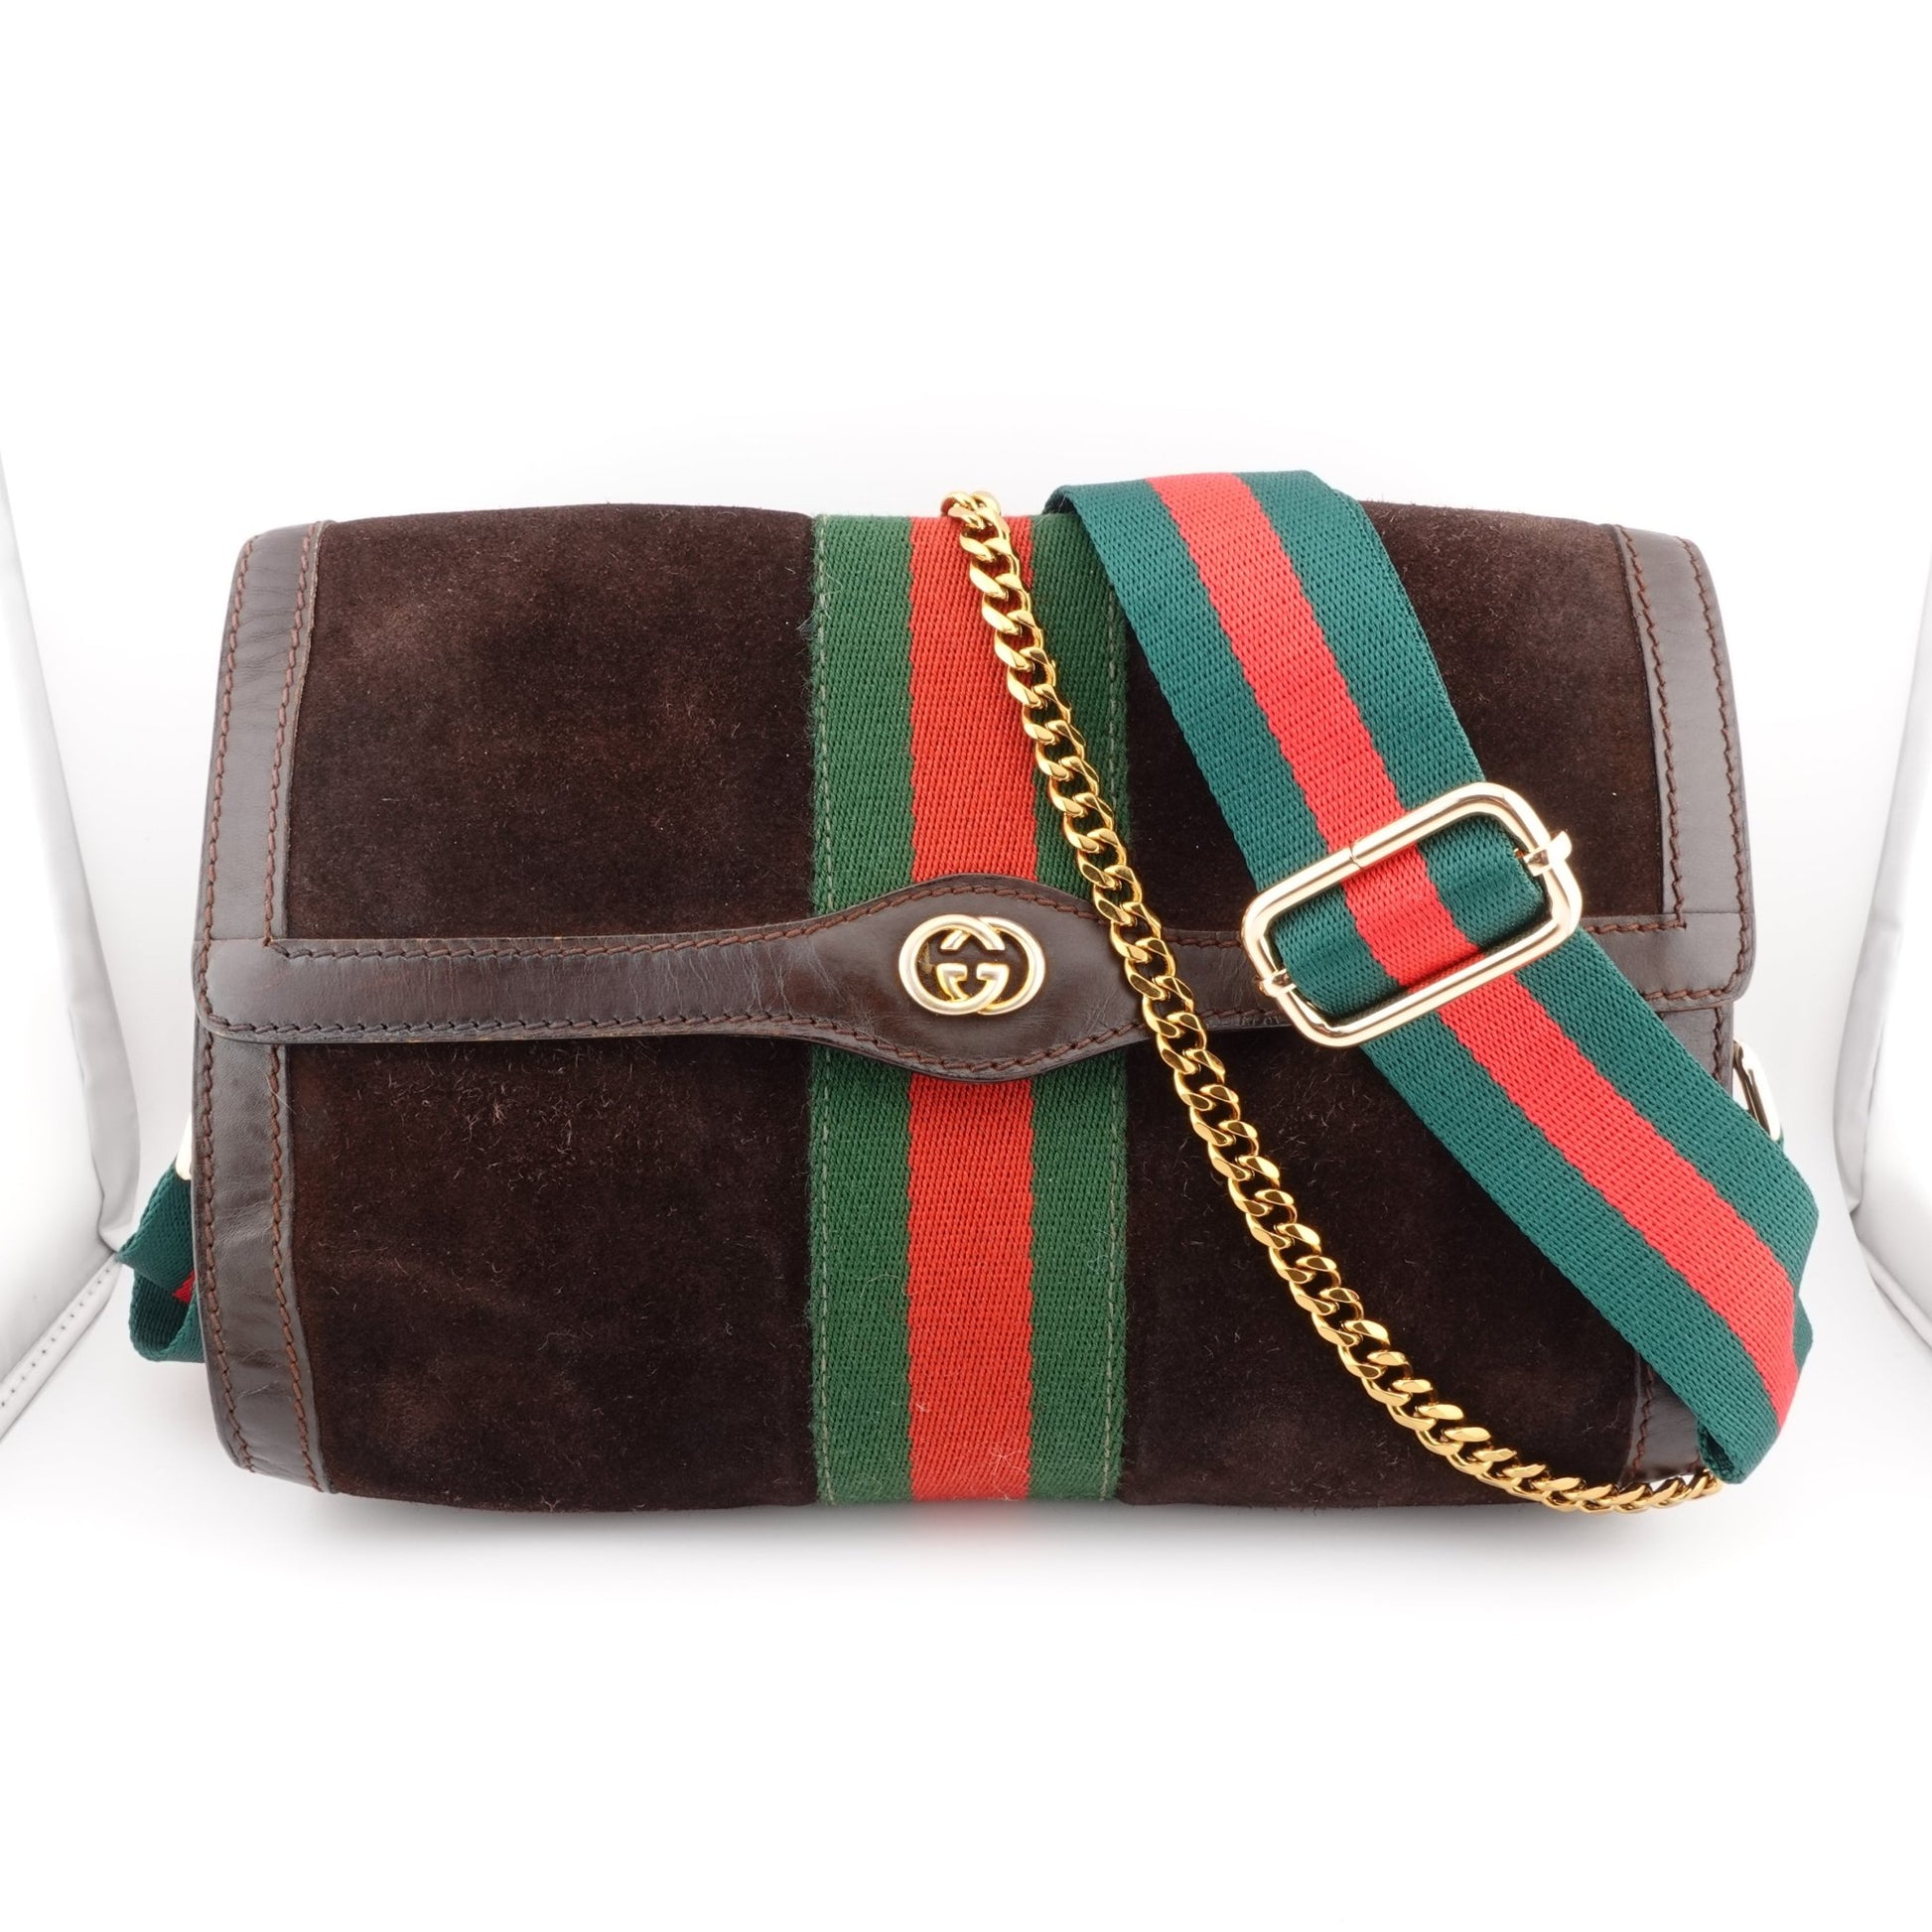 GUCCI Medium Suede Ophidia Clutch with Strap & Chain - Bag Envy